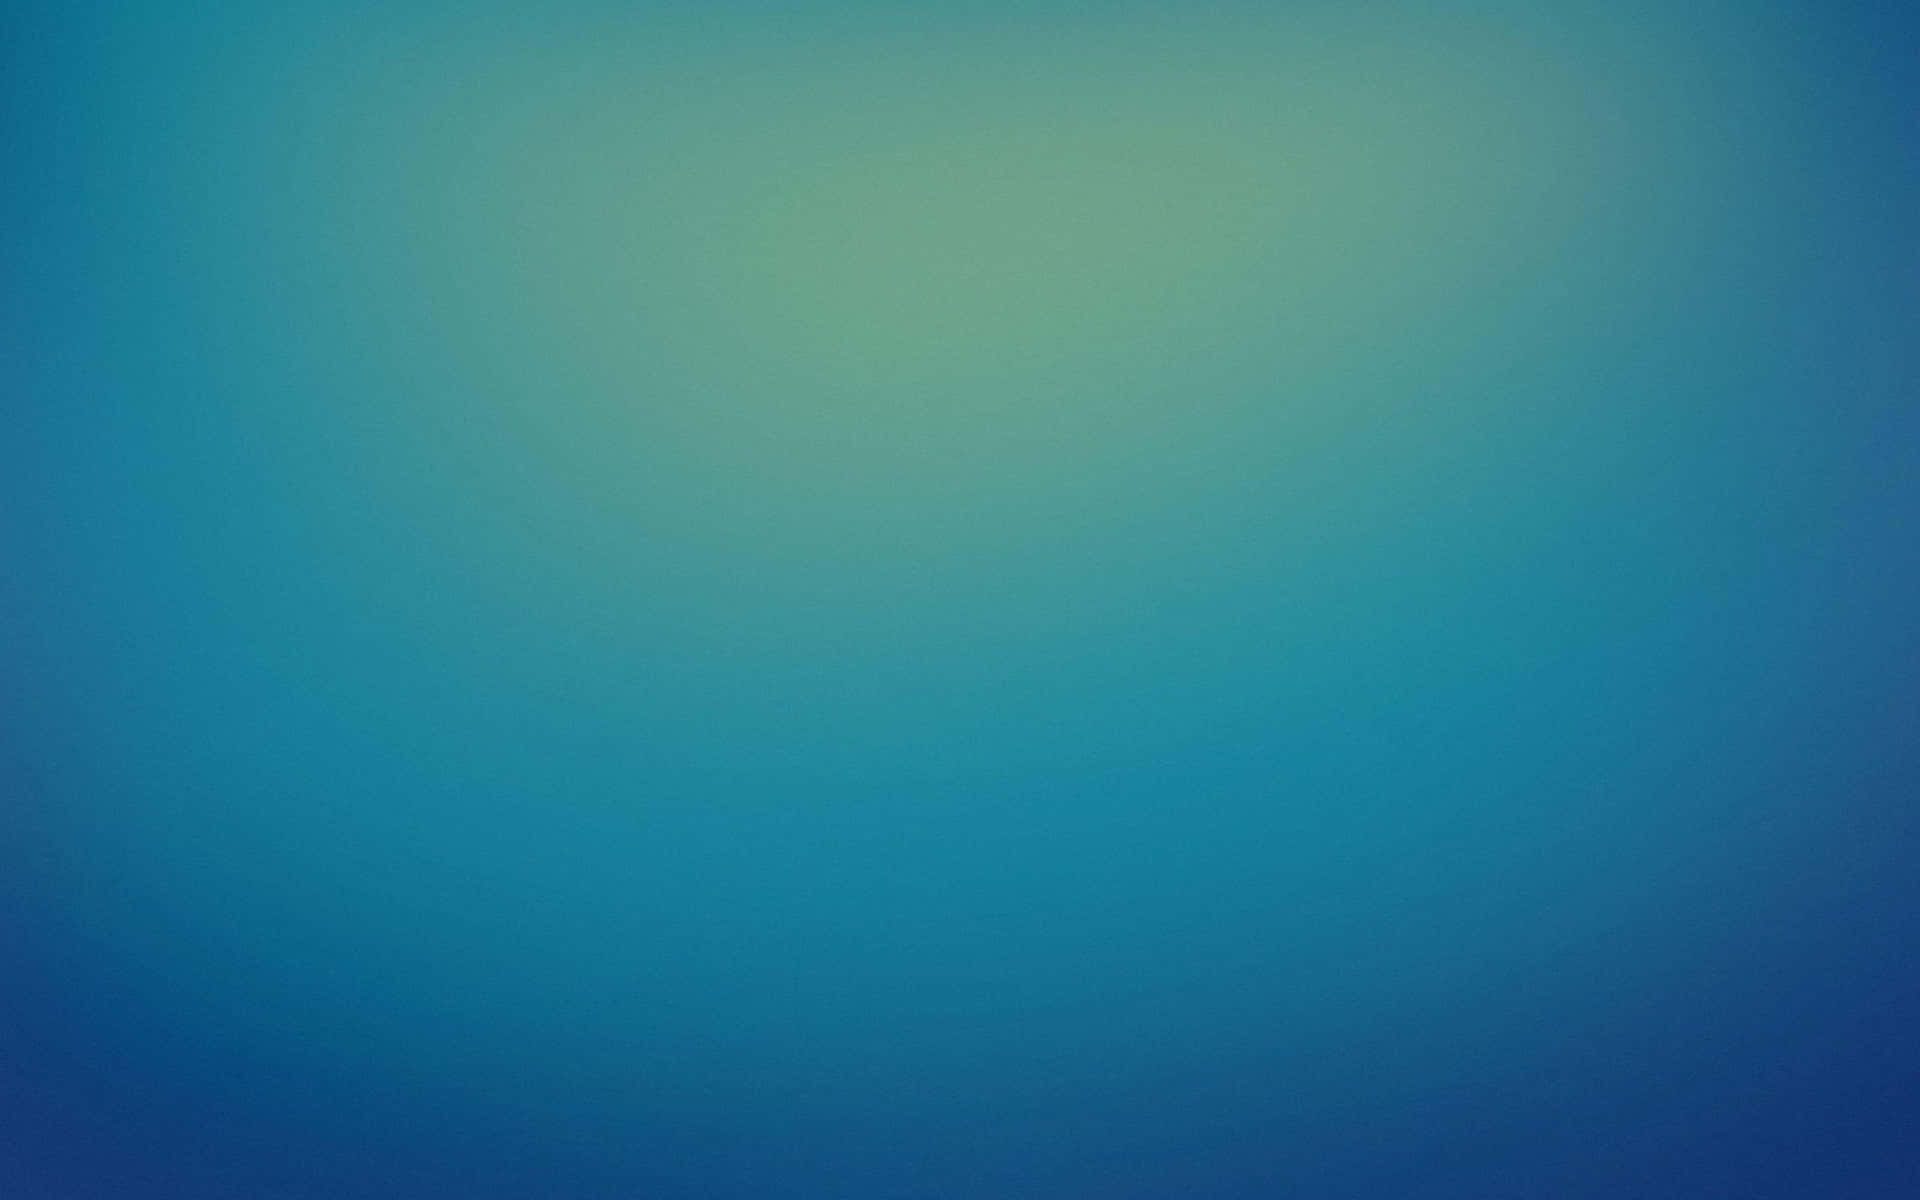 A solid, calming sea blue background.